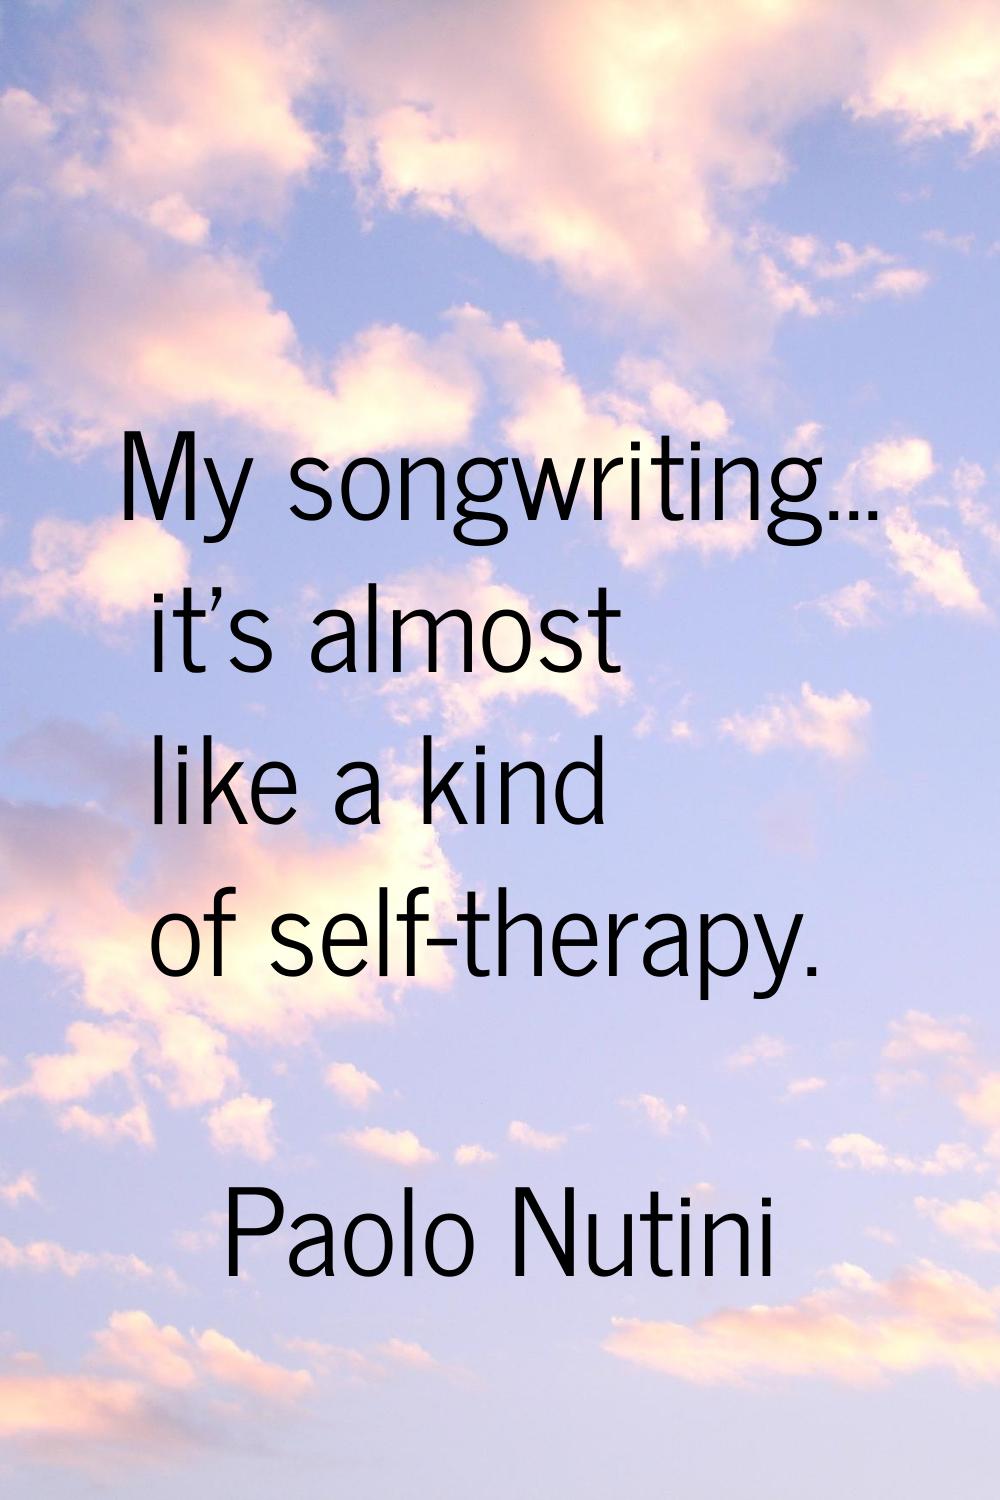 My songwriting... it's almost like a kind of self-therapy.